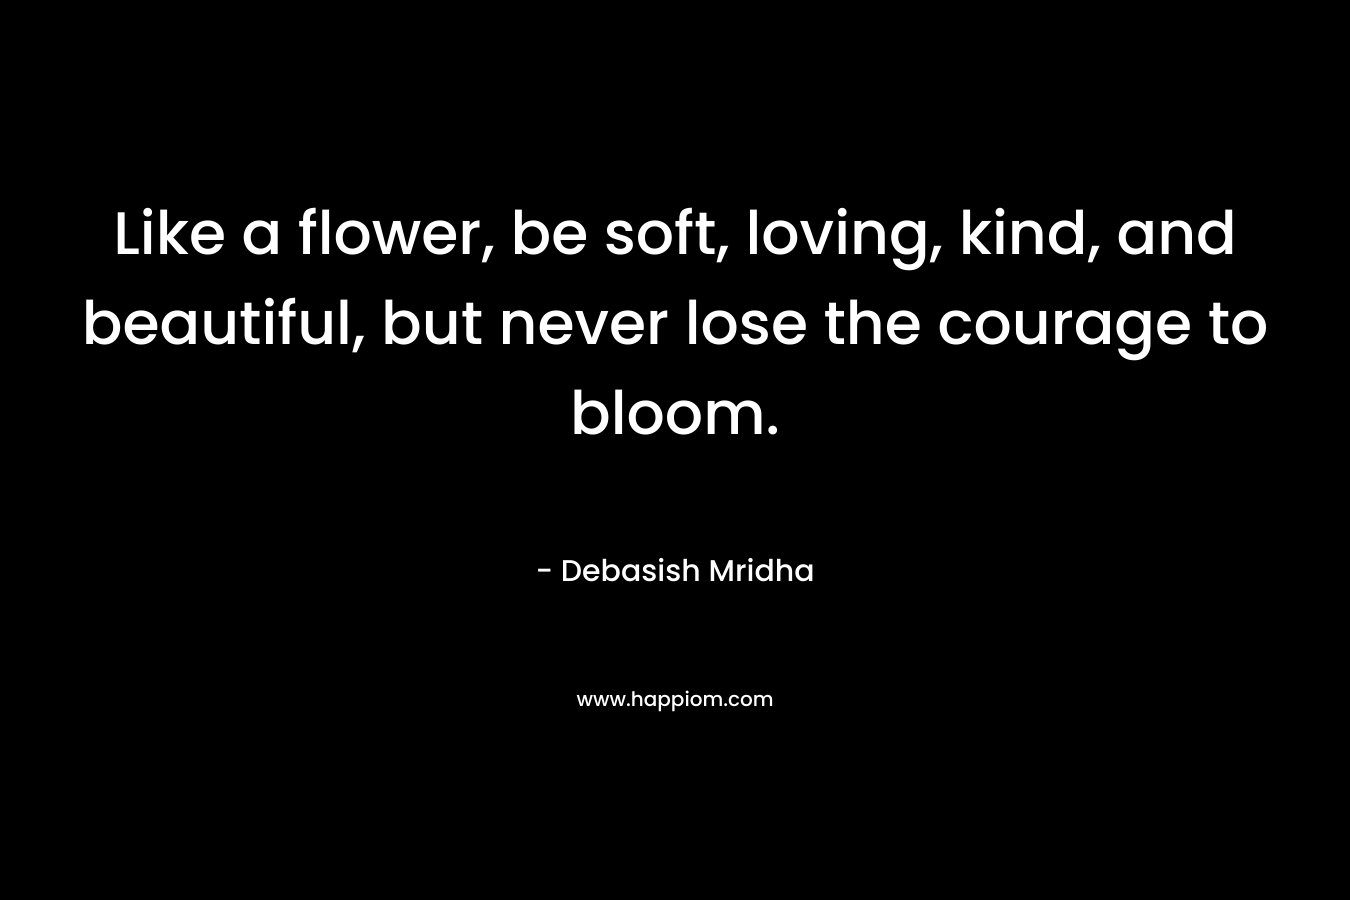 Like a flower, be soft, loving, kind, and beautiful, but never lose the courage to bloom.